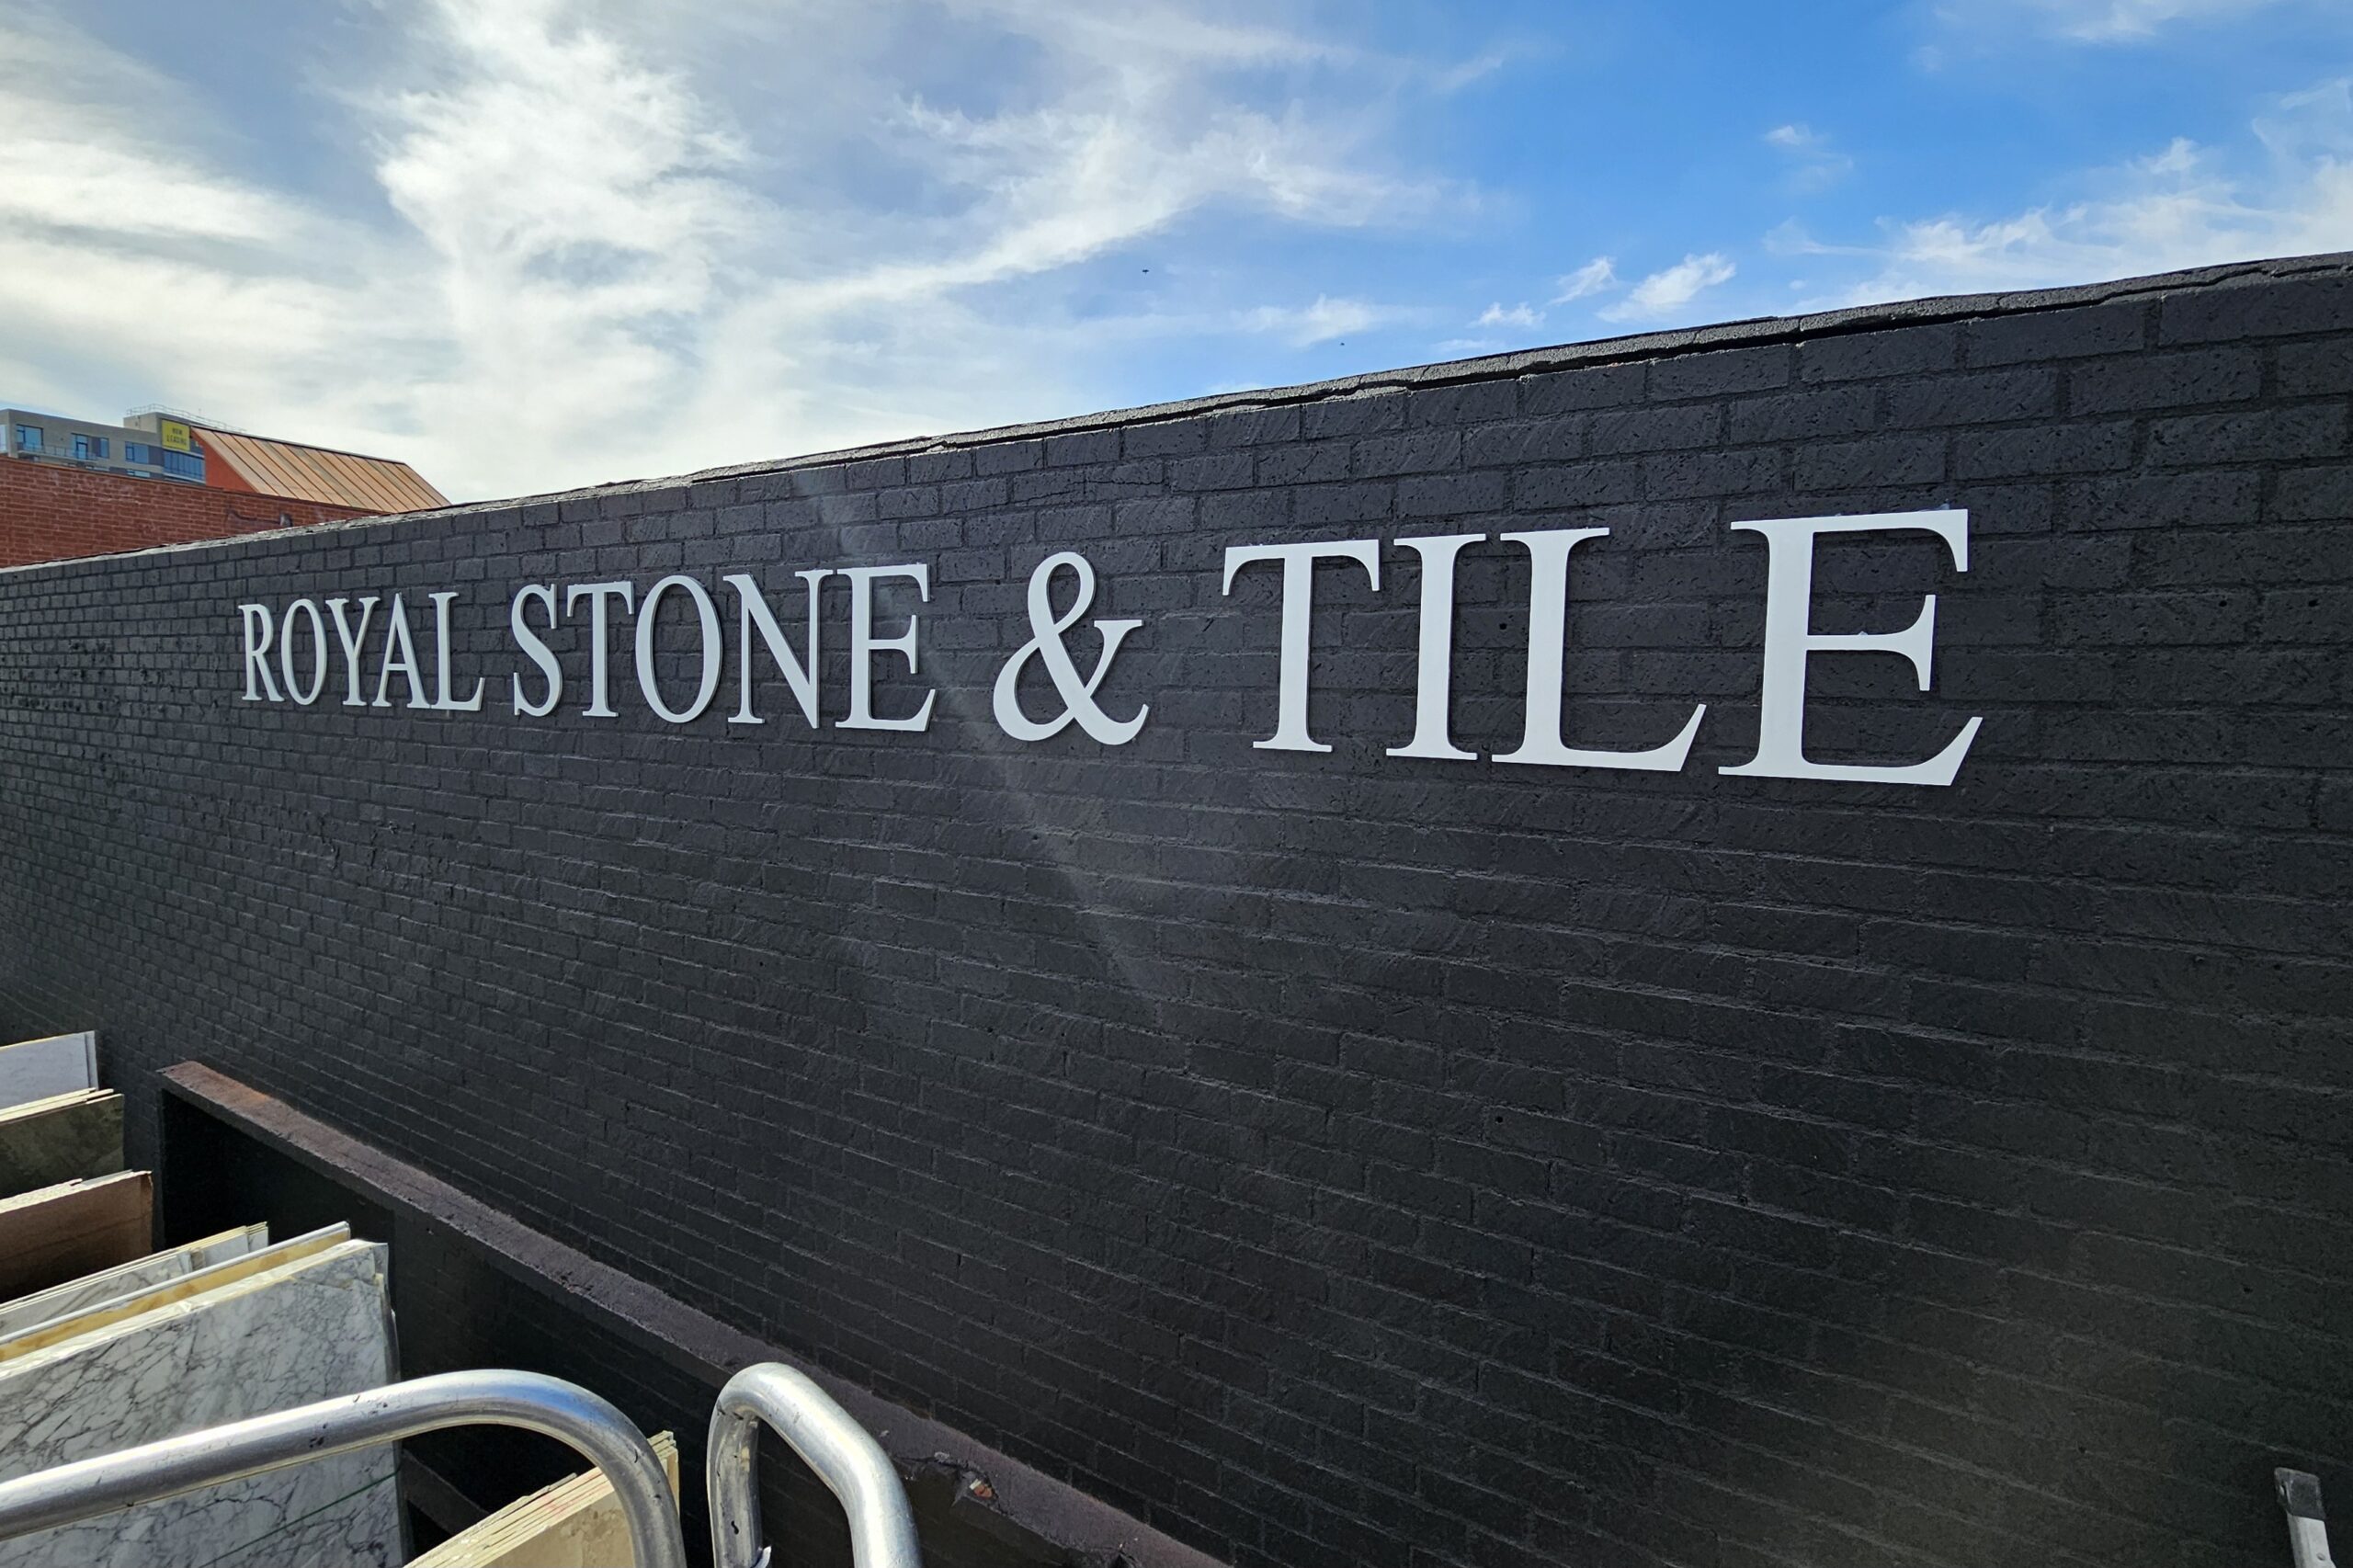 A close-up photo of the "Royal Stone & Tile" dimensional signage. The focus is on the smooth, metallic silver finish of the acrylic material, which reflects light and creates a polished look.